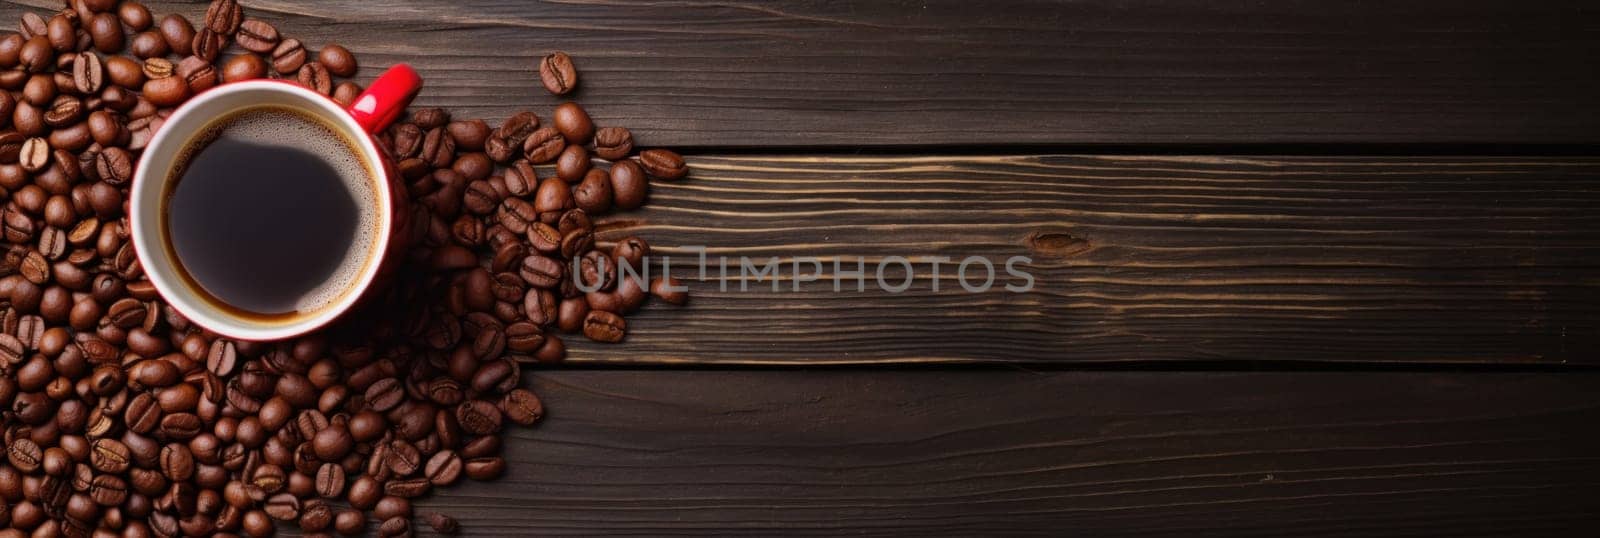 A cup of coffee is surrounded by roasted beans on a wooden table, AI by starush